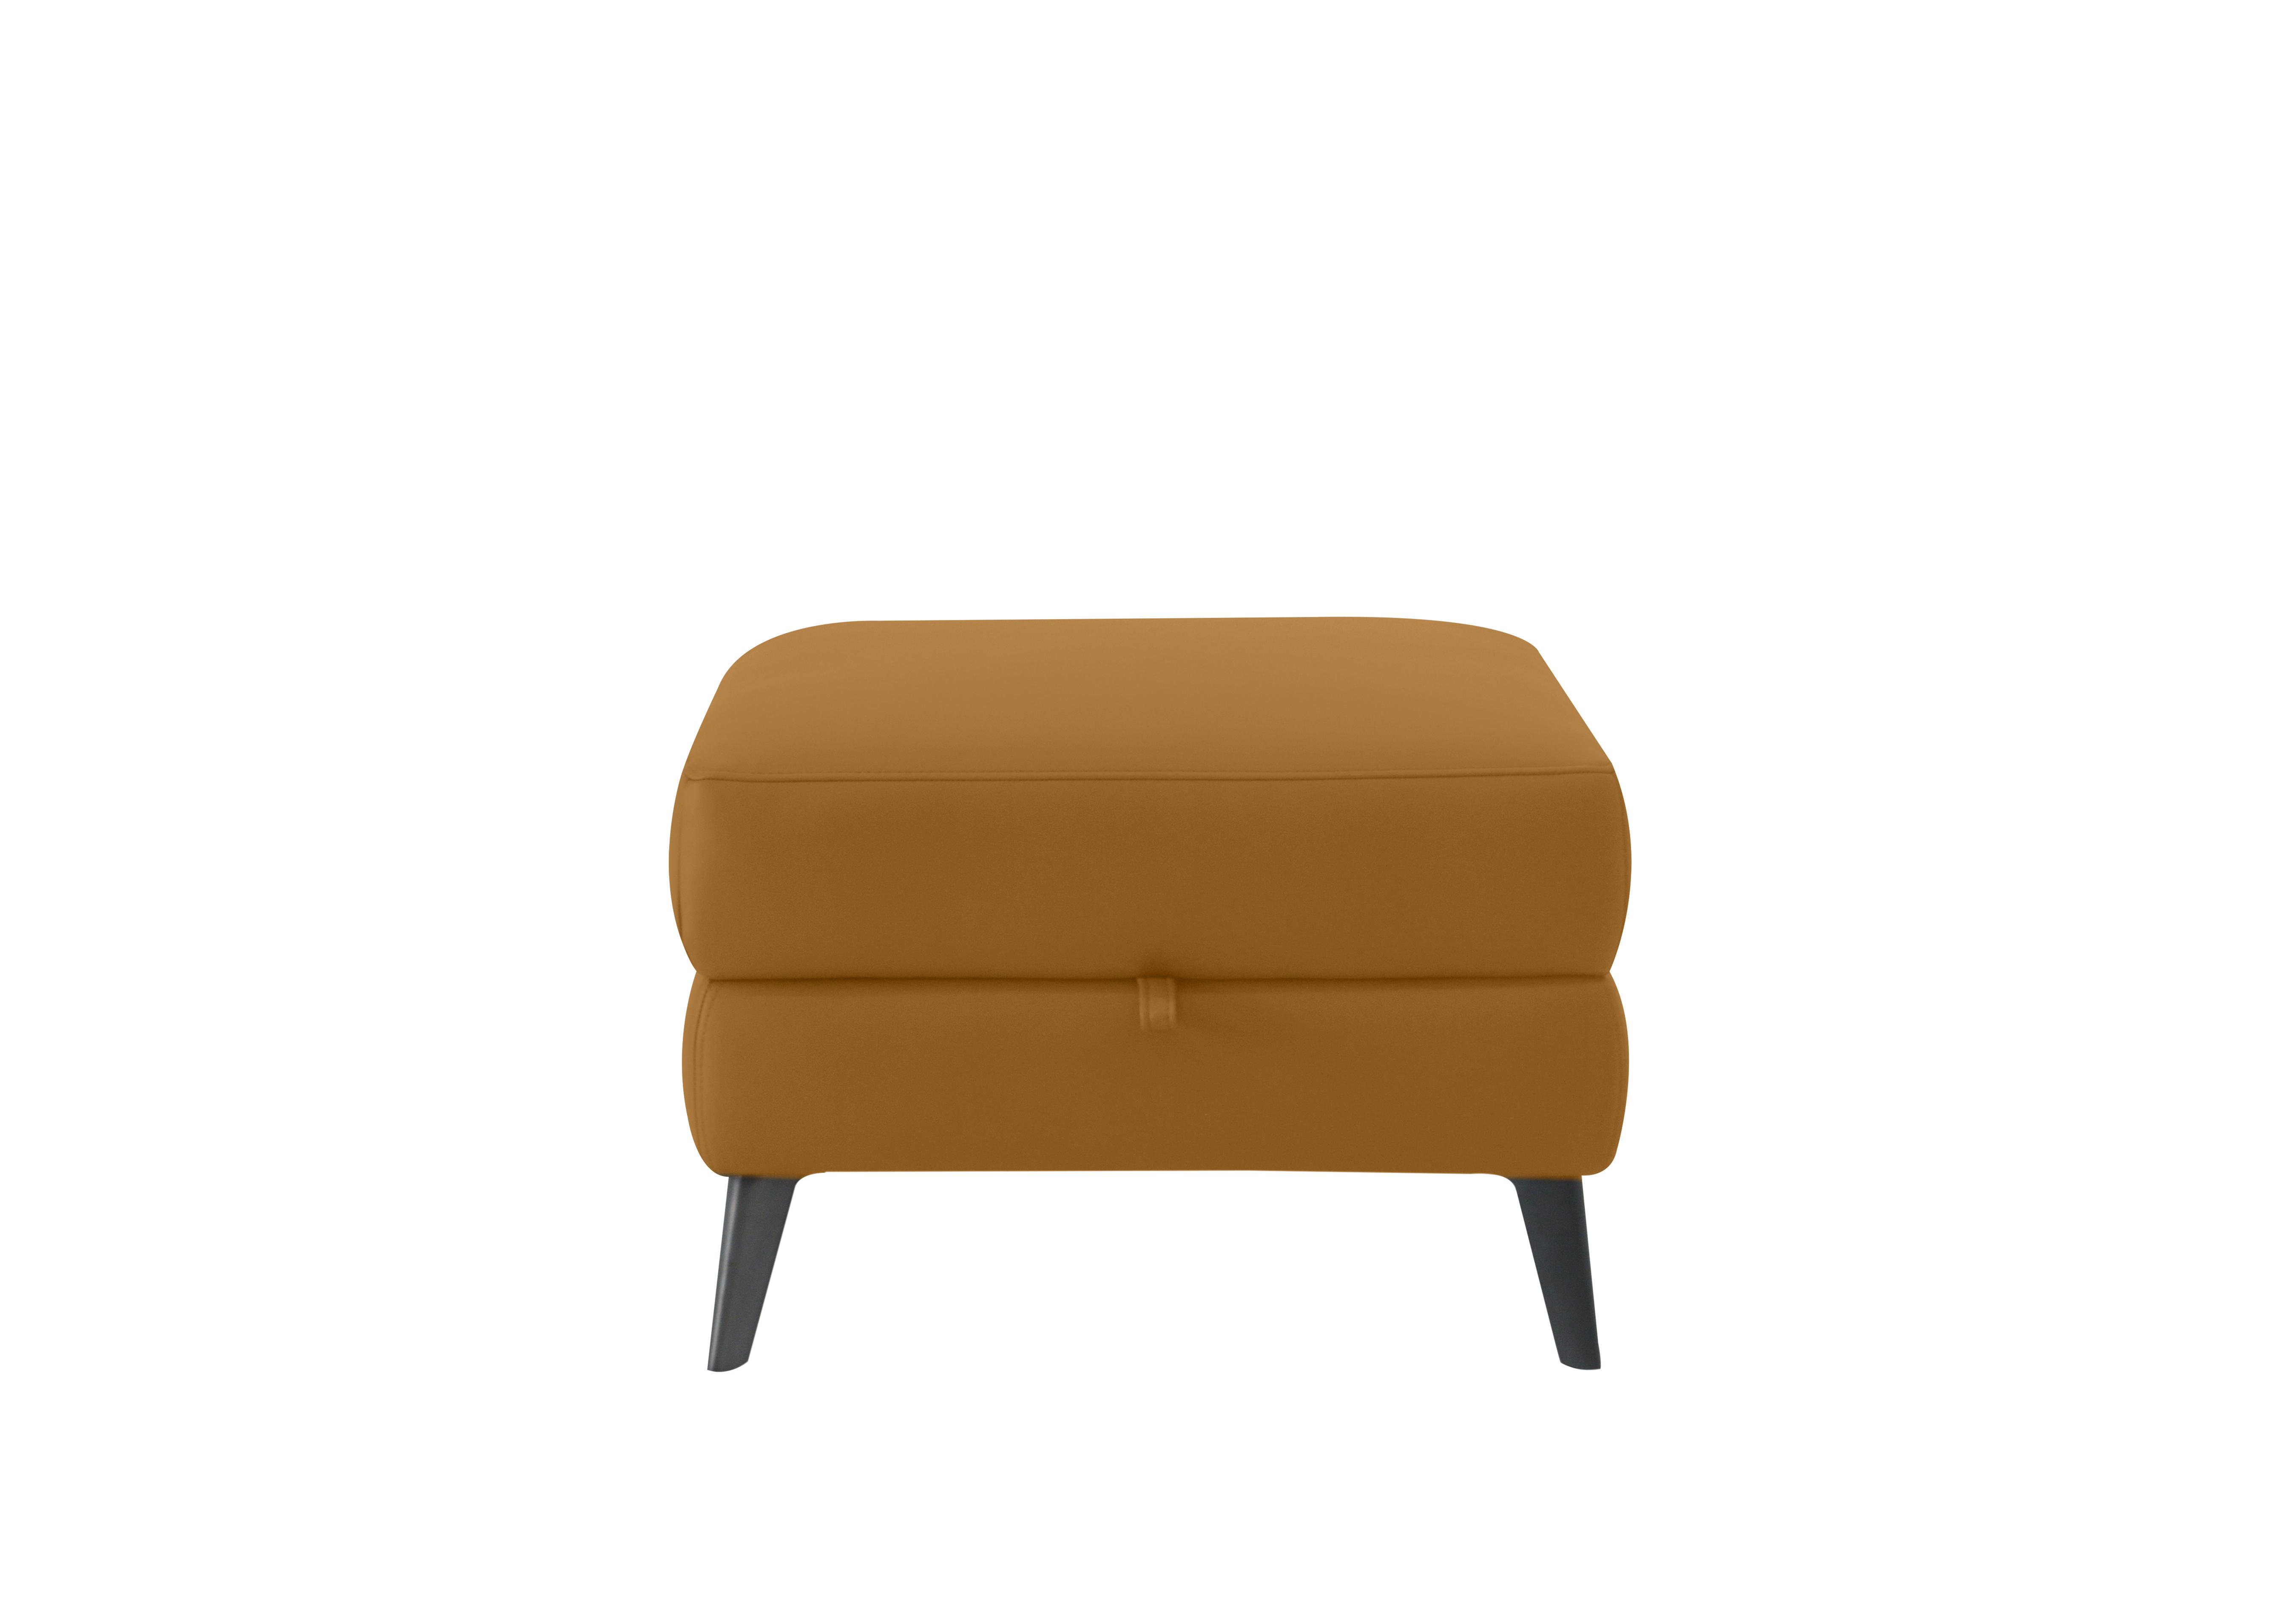 Huxley Leather Storage Footstool in Np-606e Honey Yellow on Furniture Village